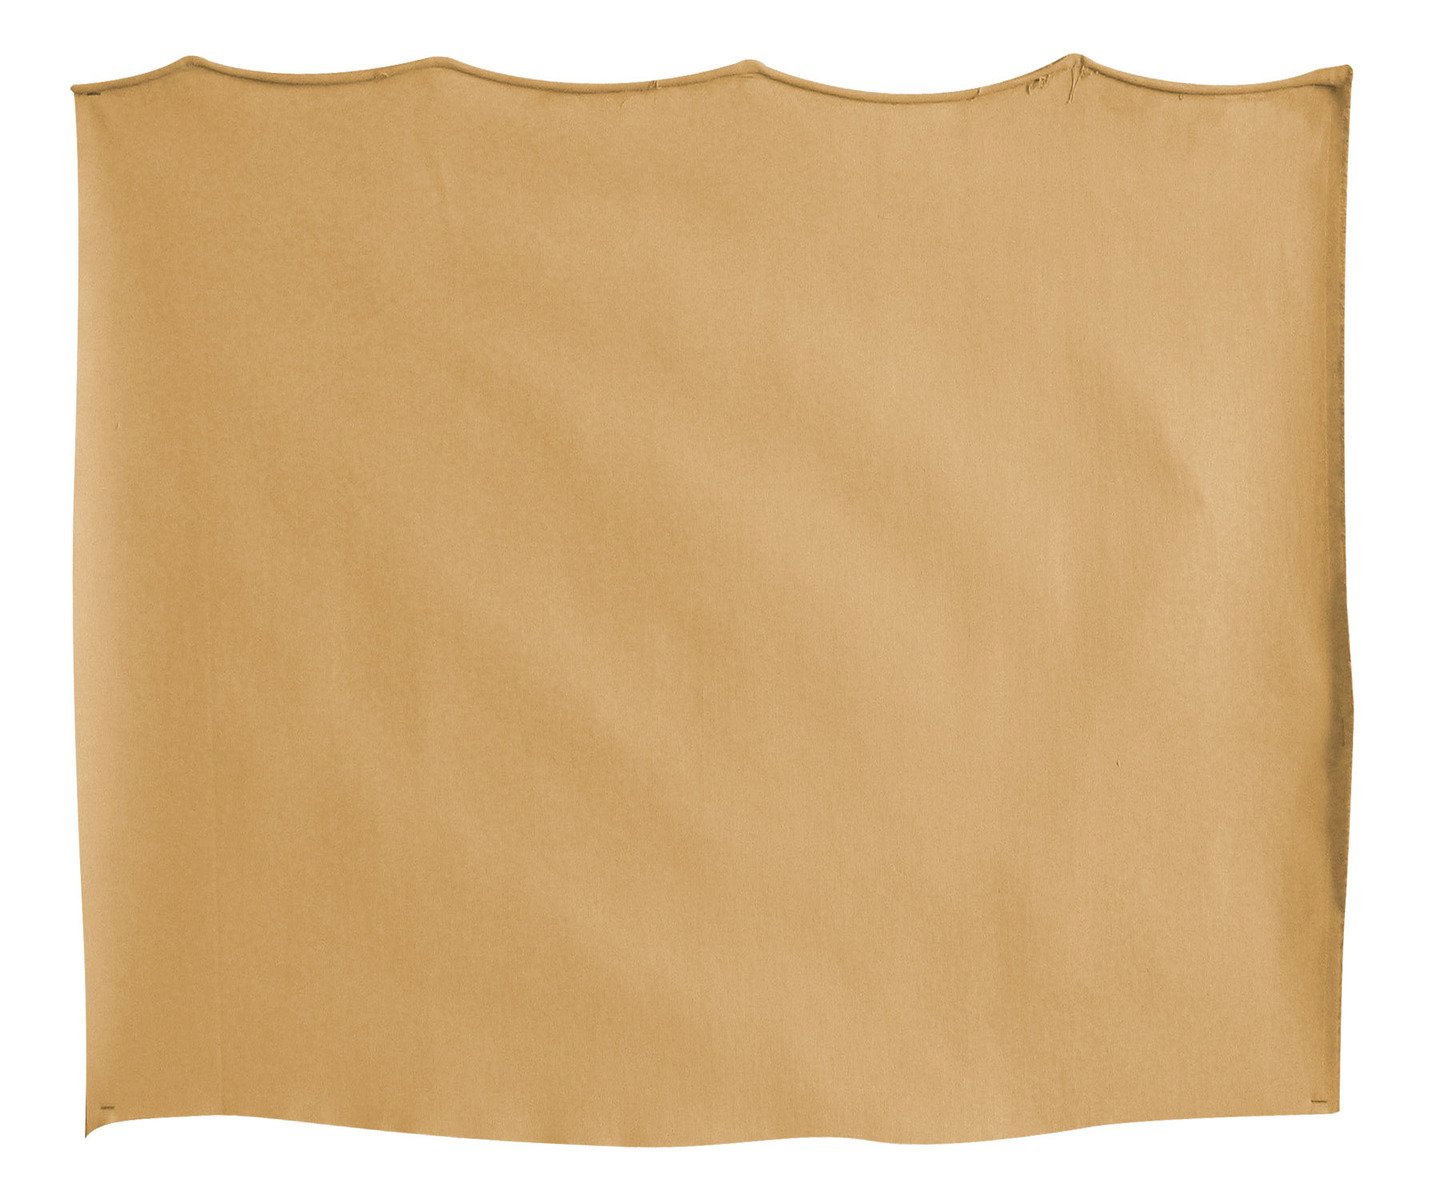 a brown paper sheet with some sort of ruffled edge